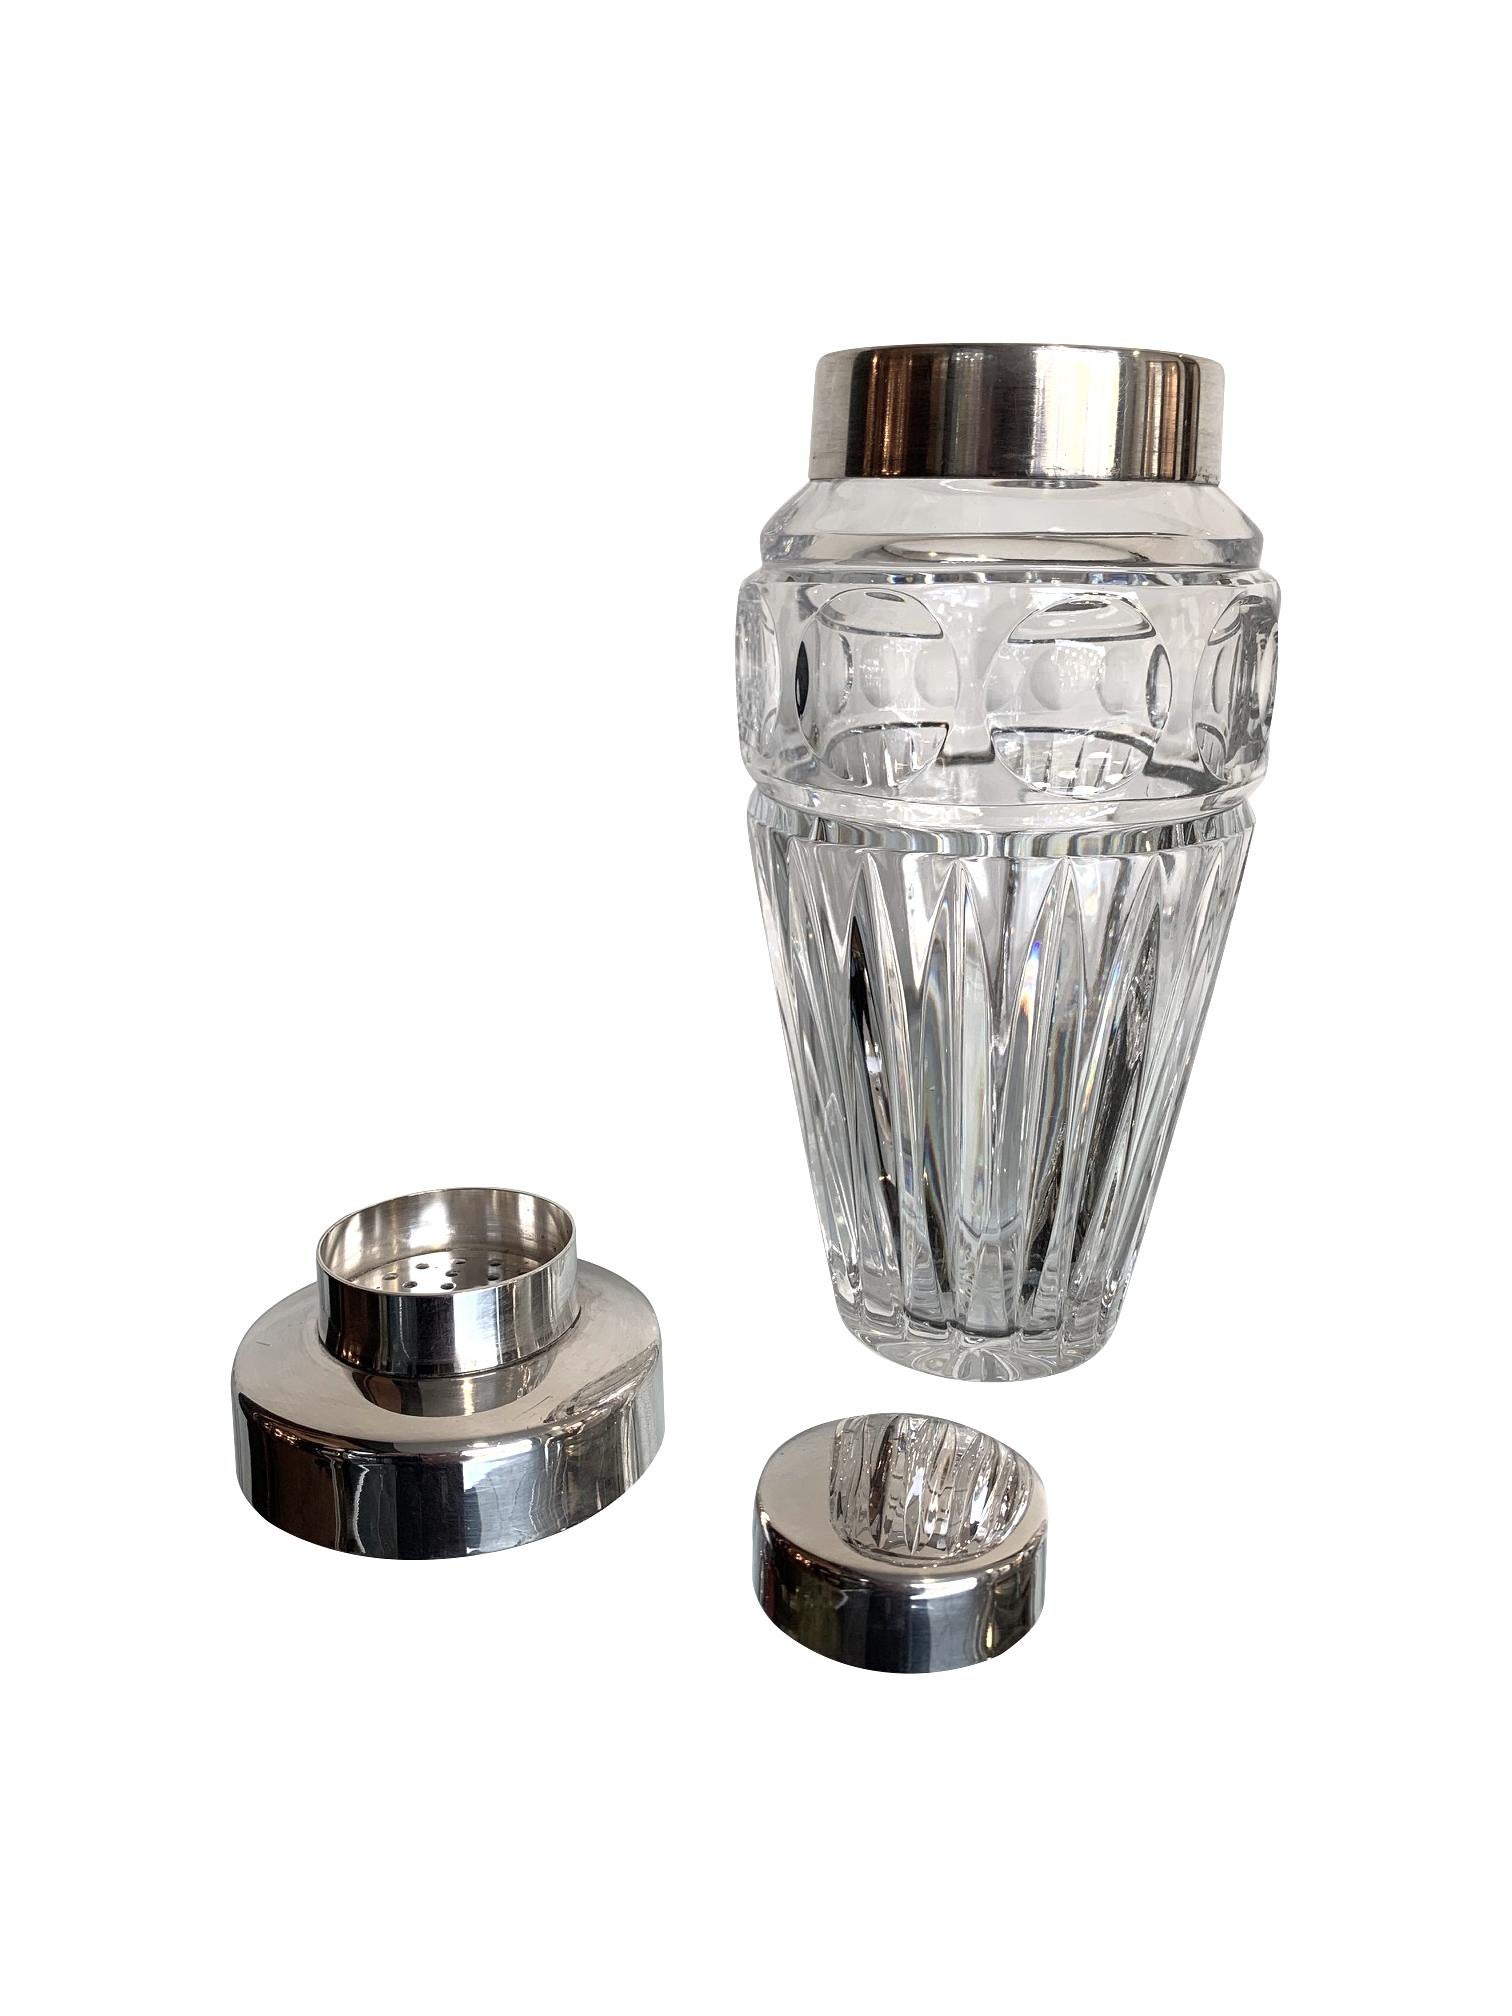 Mid-20th Century 1950s Val Saint Lambert Crystal Cocktail Shaker and Matching Ice Bucket